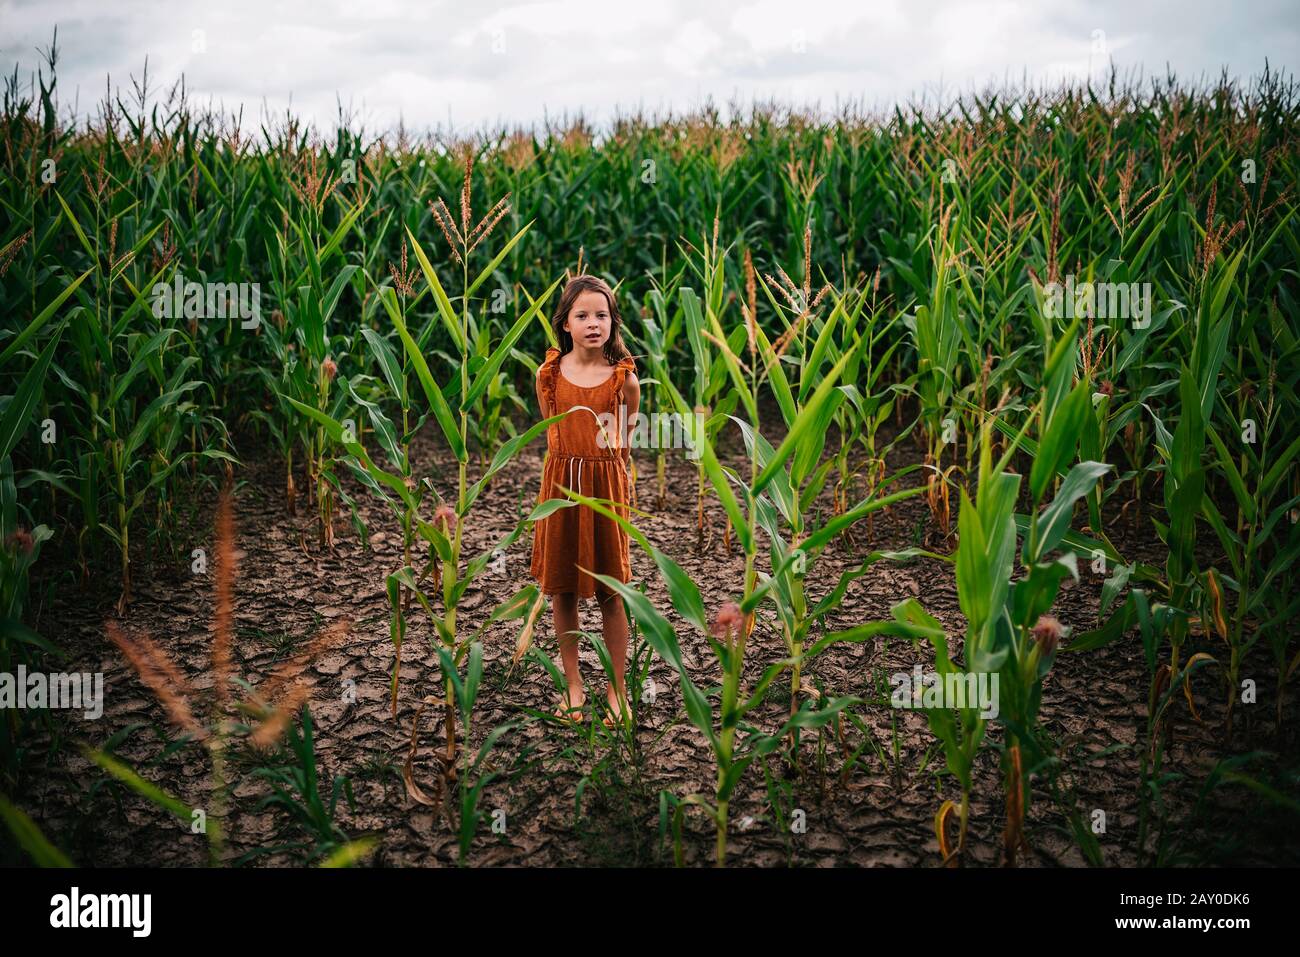 Girl standing in a corn field, USA Stock Photo